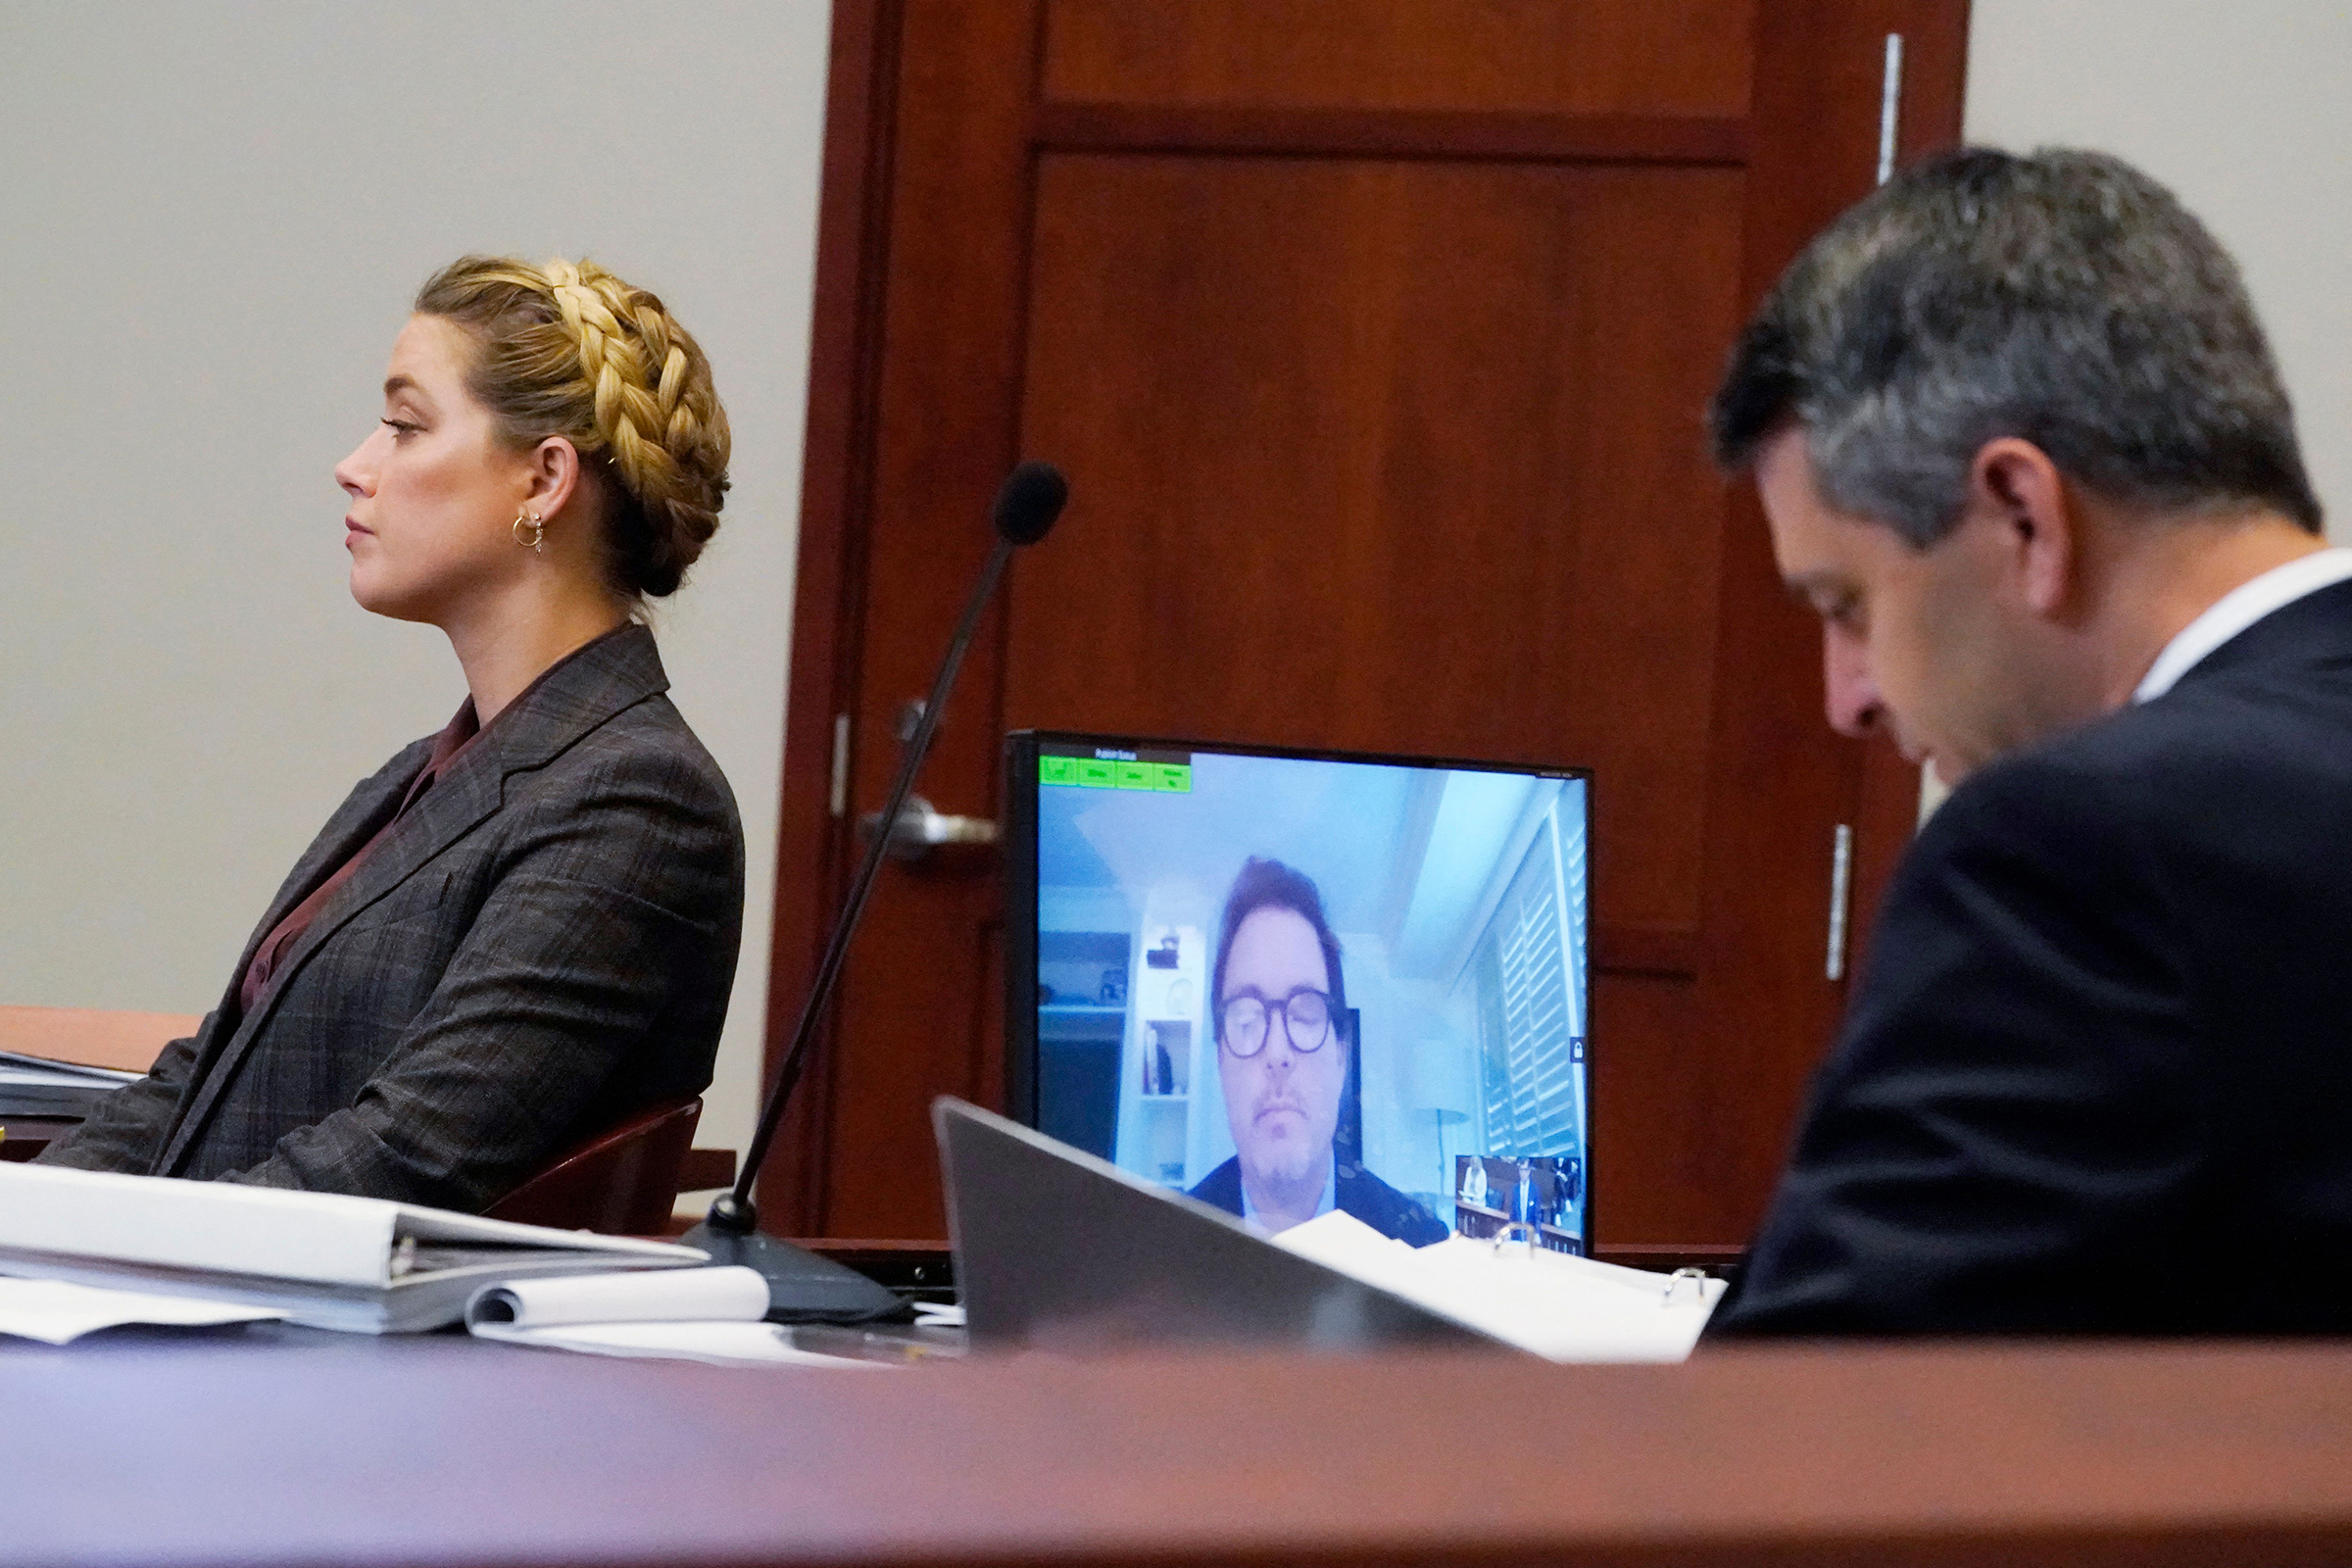 Actress Amber Heard, left, and her attorney, Ben Rottenborn, right, listen as Jack Whigham, center, talent manager for US actor Johnny Depp, is seen on a monitor as he testifies remotely in the courtroom